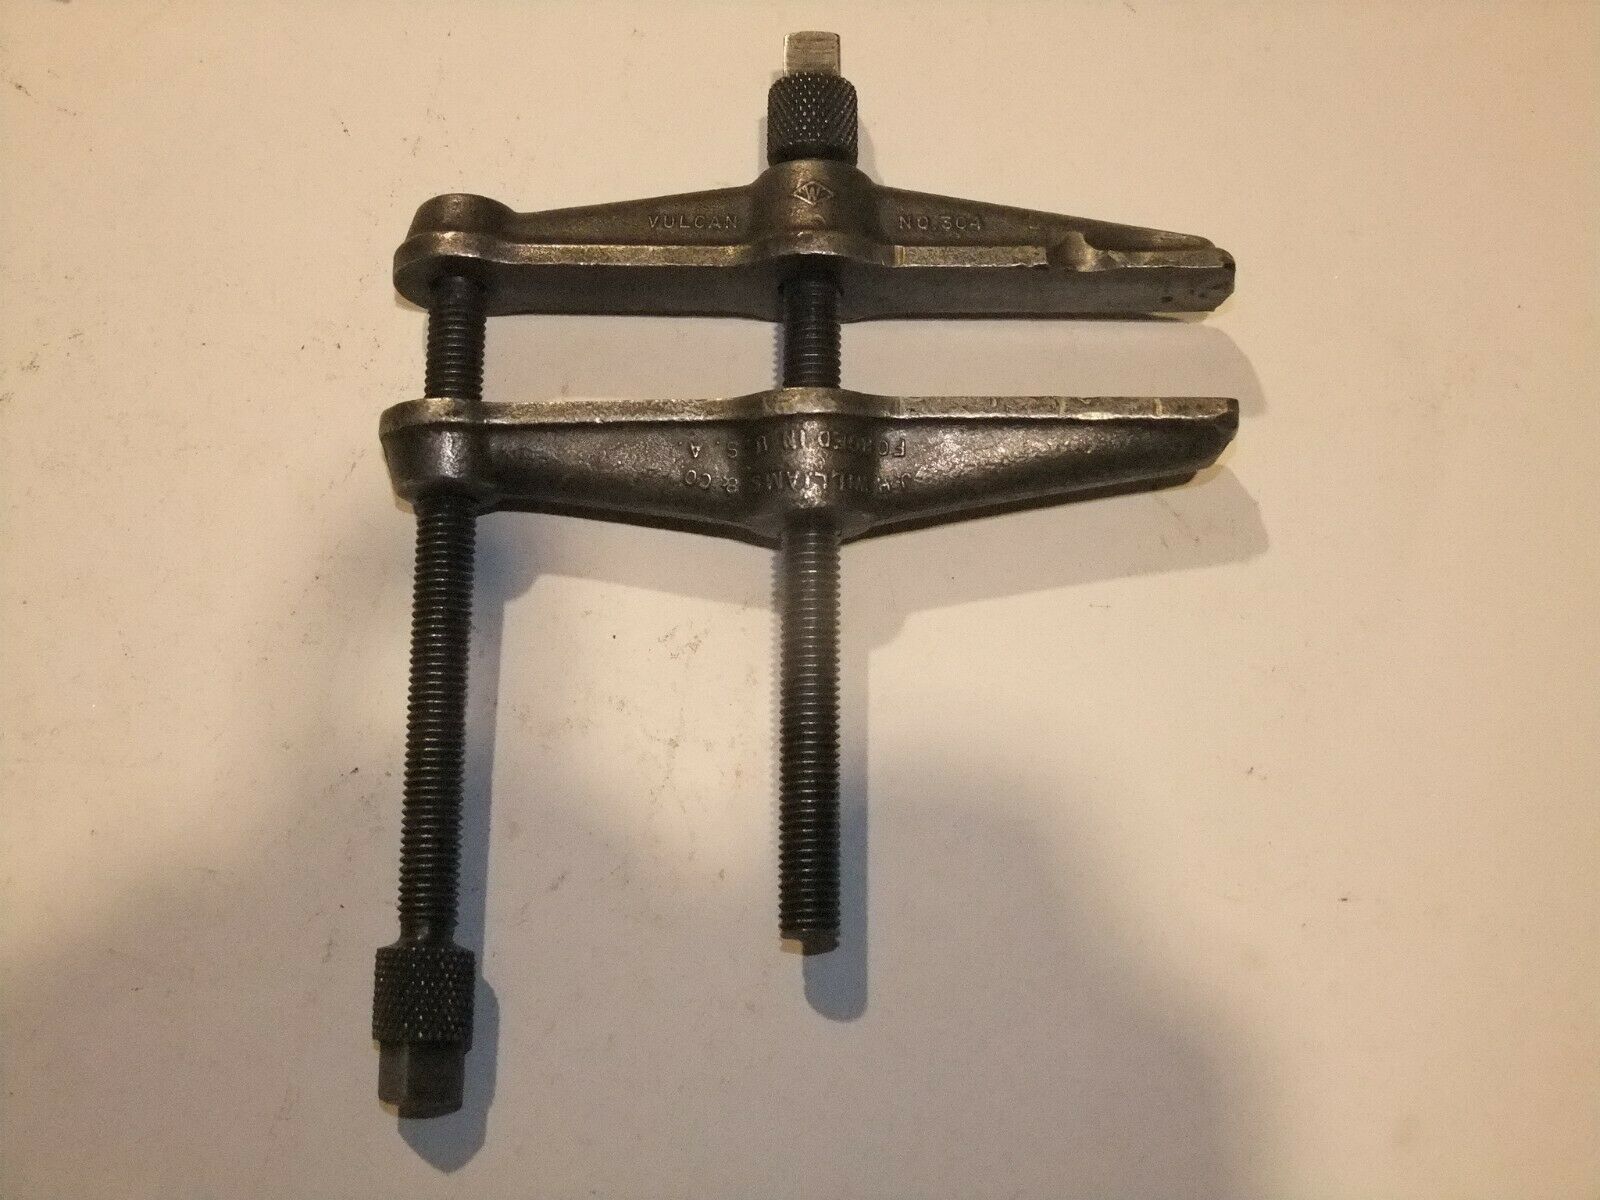 J.h. Williams & Co.  Vulcan No. 304 Parallel Clamp